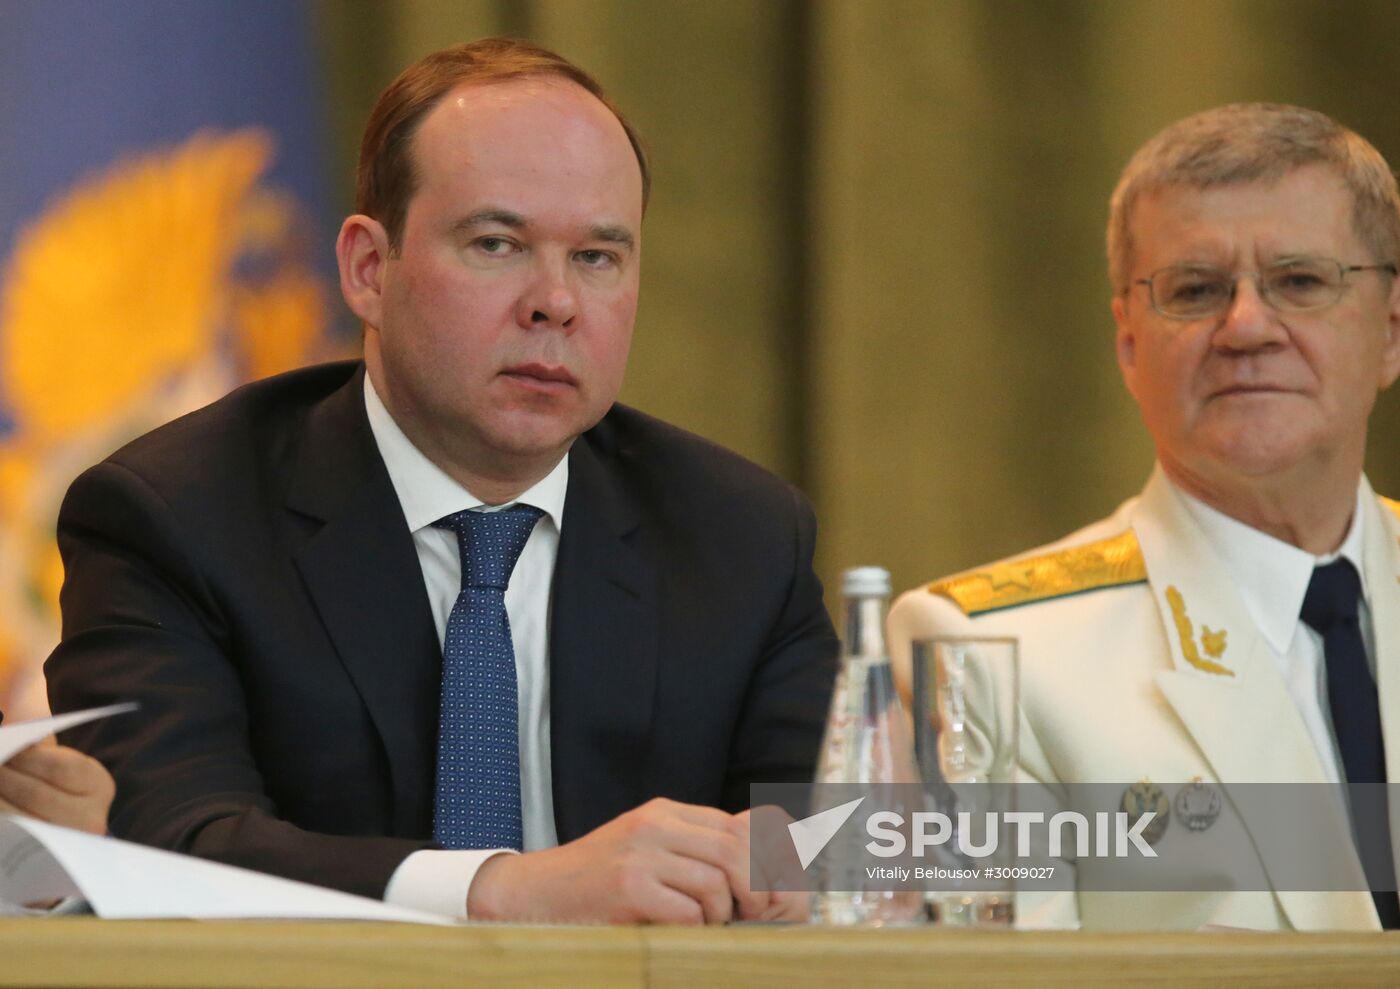 Meeting marking 295th anniversary of Russian Prosecutor General's Office